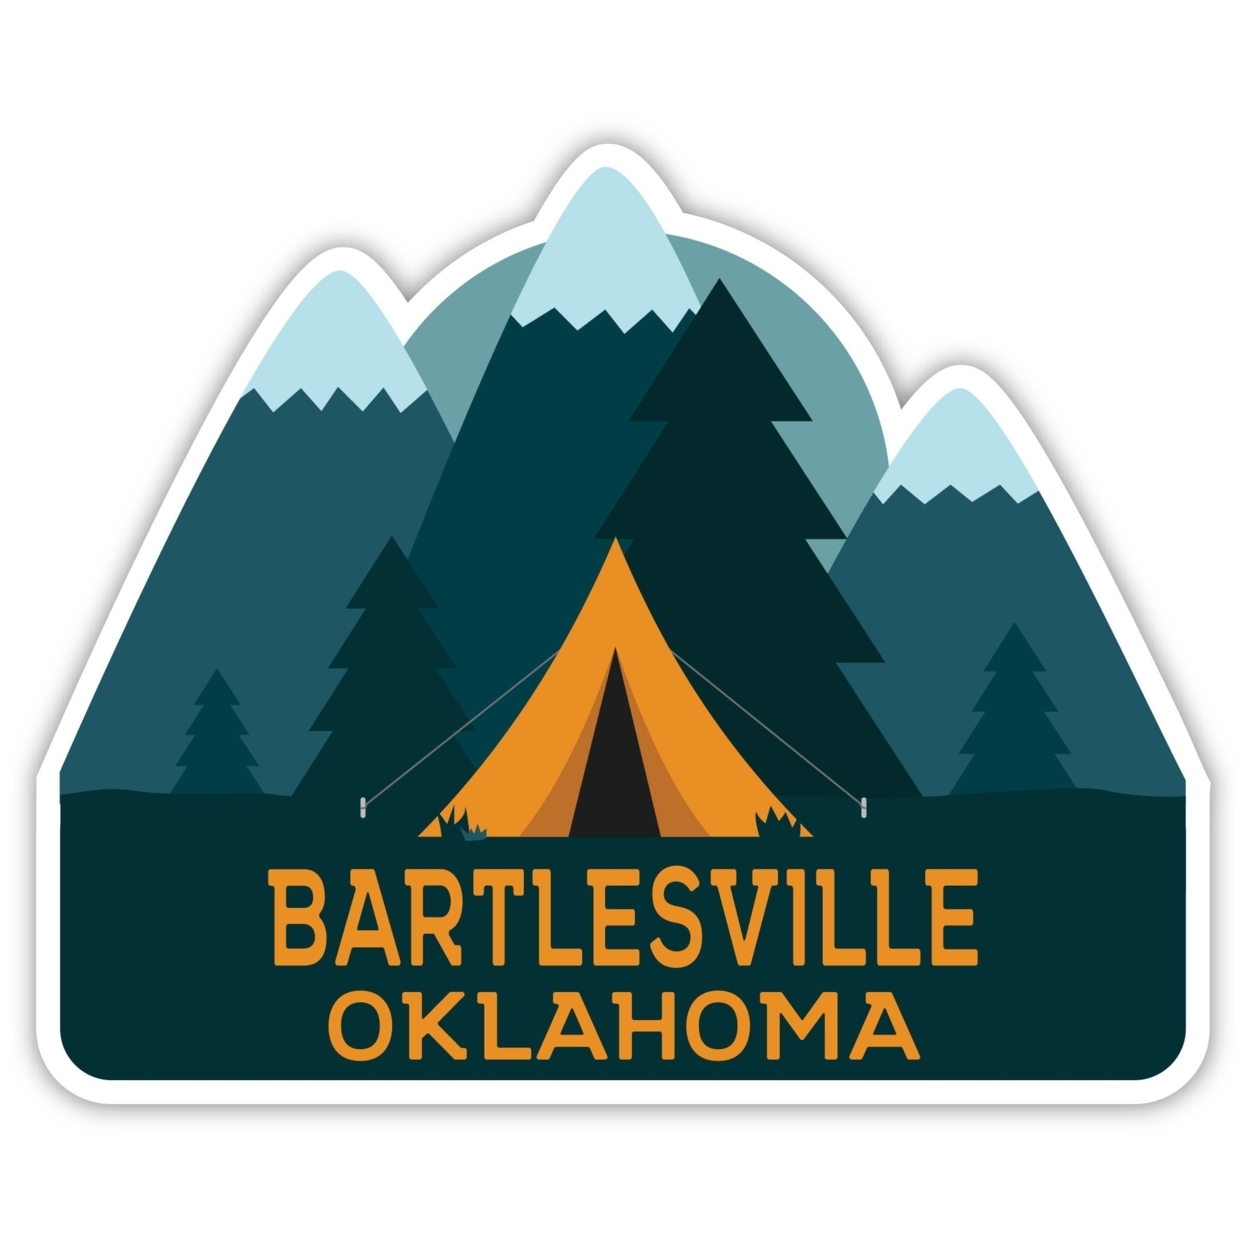 Bartlesville Oklahoma Souvenir Decorative Stickers (Choose Theme And Size) - 4-Pack, 6-Inch, Tent